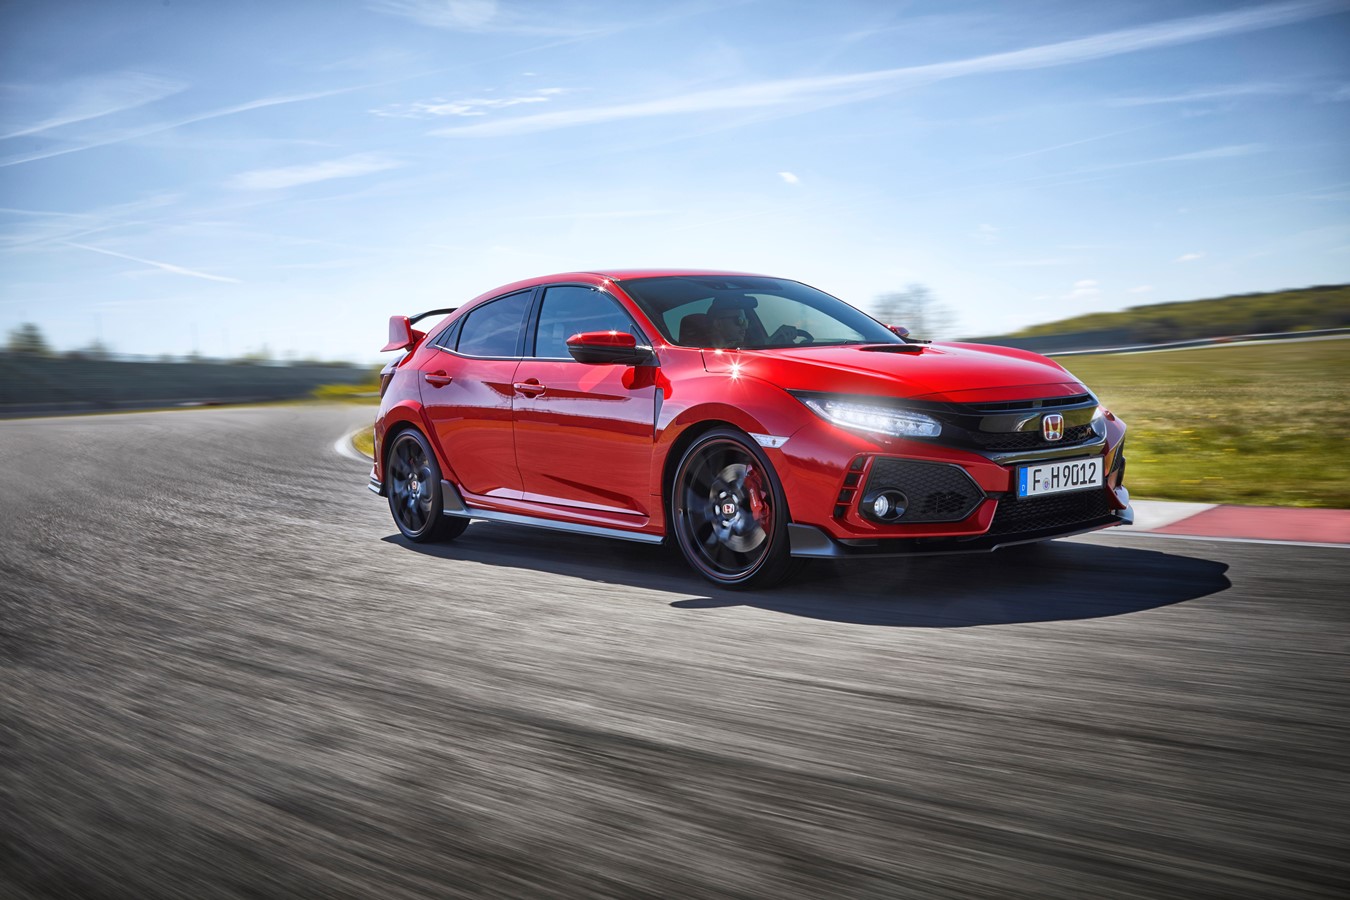 Honda Civic Type R named ‘Best Performance Car’ in Women’s World Car of the Year Awards